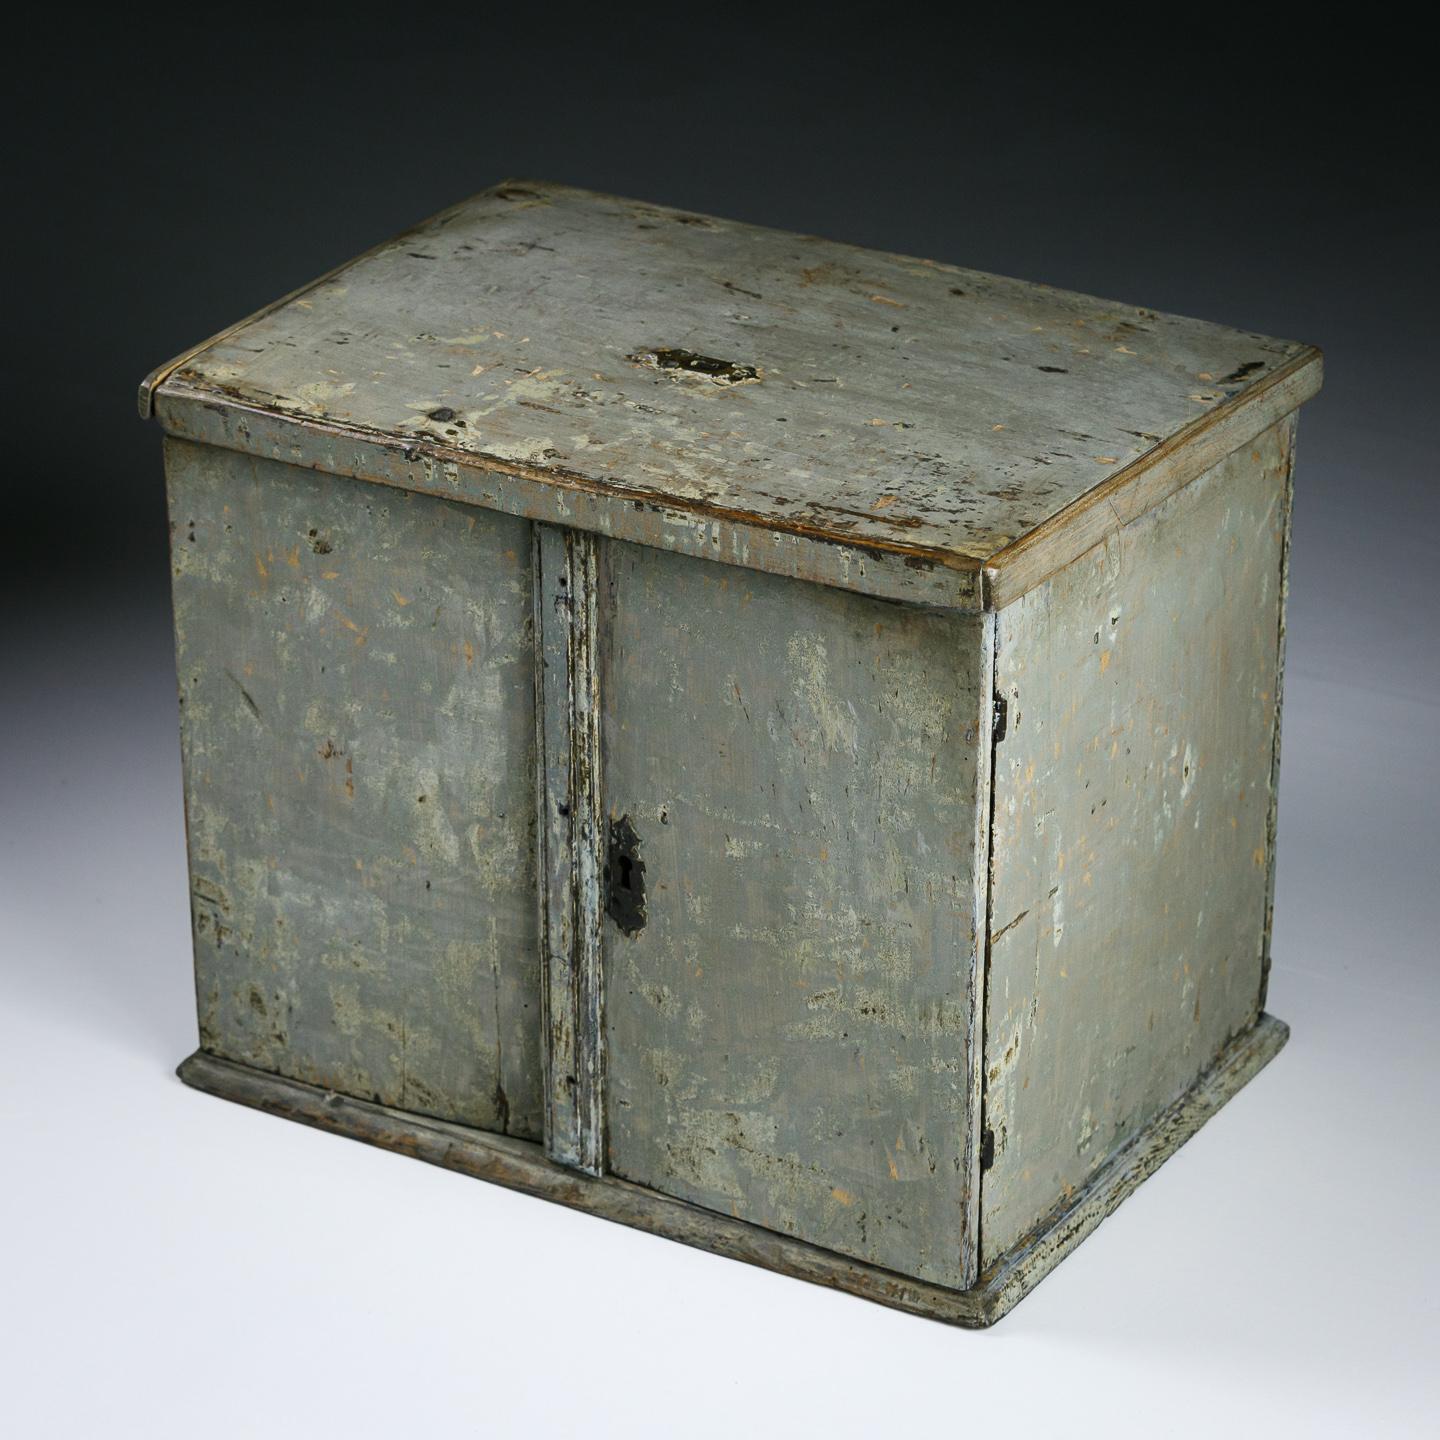 Extraordinary early 18th century Necessaire a Secrets, the exterior painstakingly dry scraped back to the original painted finish. the interior each drawer individually painted with charming naive scene. A further secret compartment found beyond the